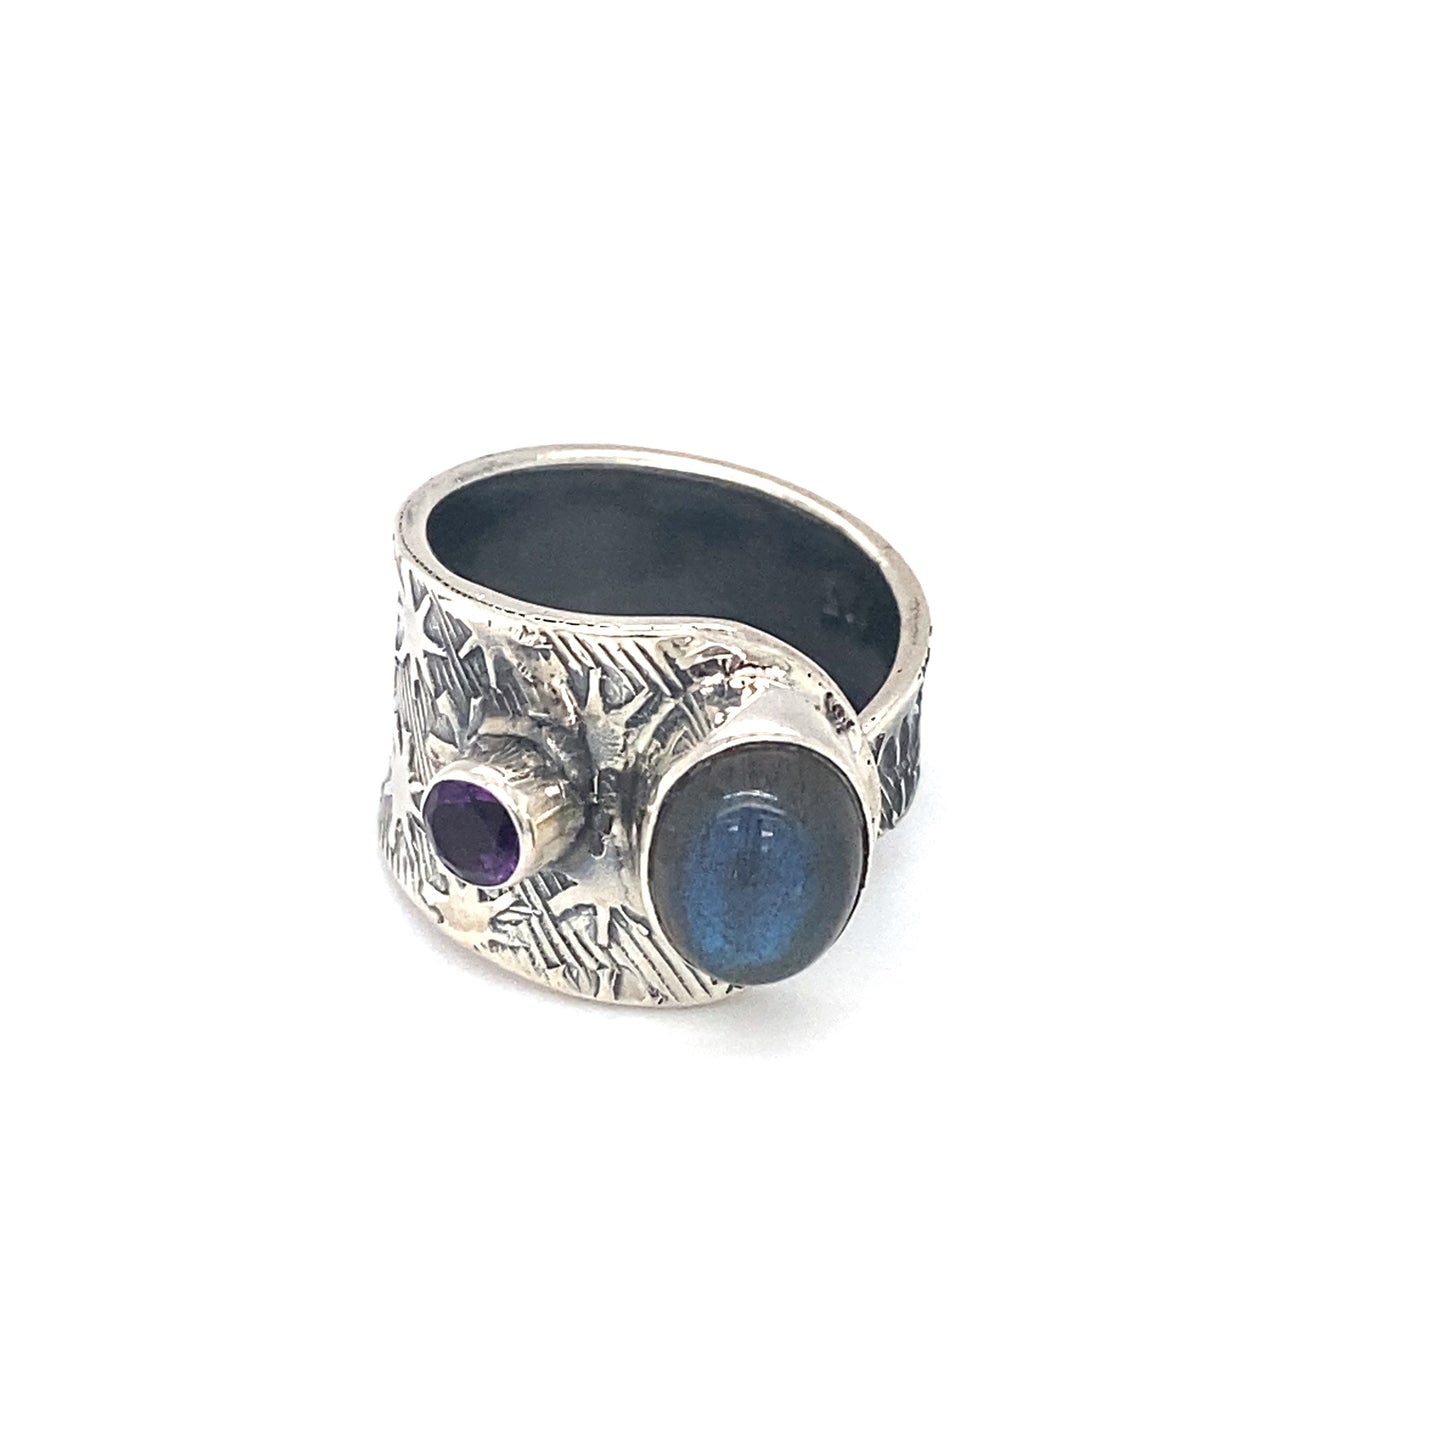 Circa 1990s Labradorite and Amethyst Adjustable Ring in Sterling Silver